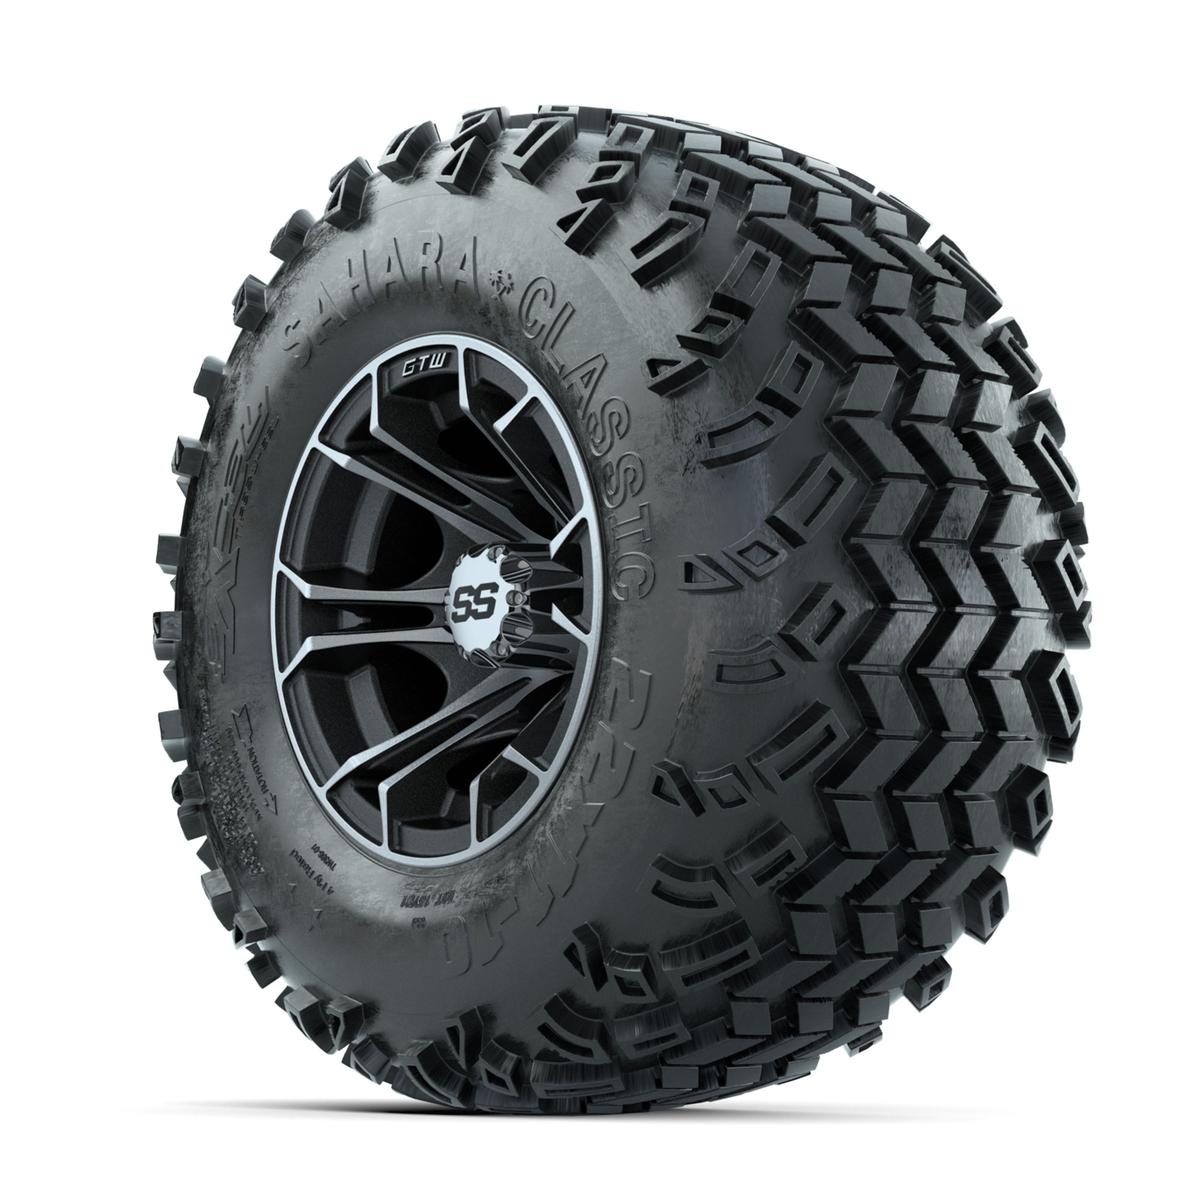 GTW Spyder Machined/Matte Grey 10 in Wheels with 22x11-10 Sahara Classic All Terrain Tires – Full Set